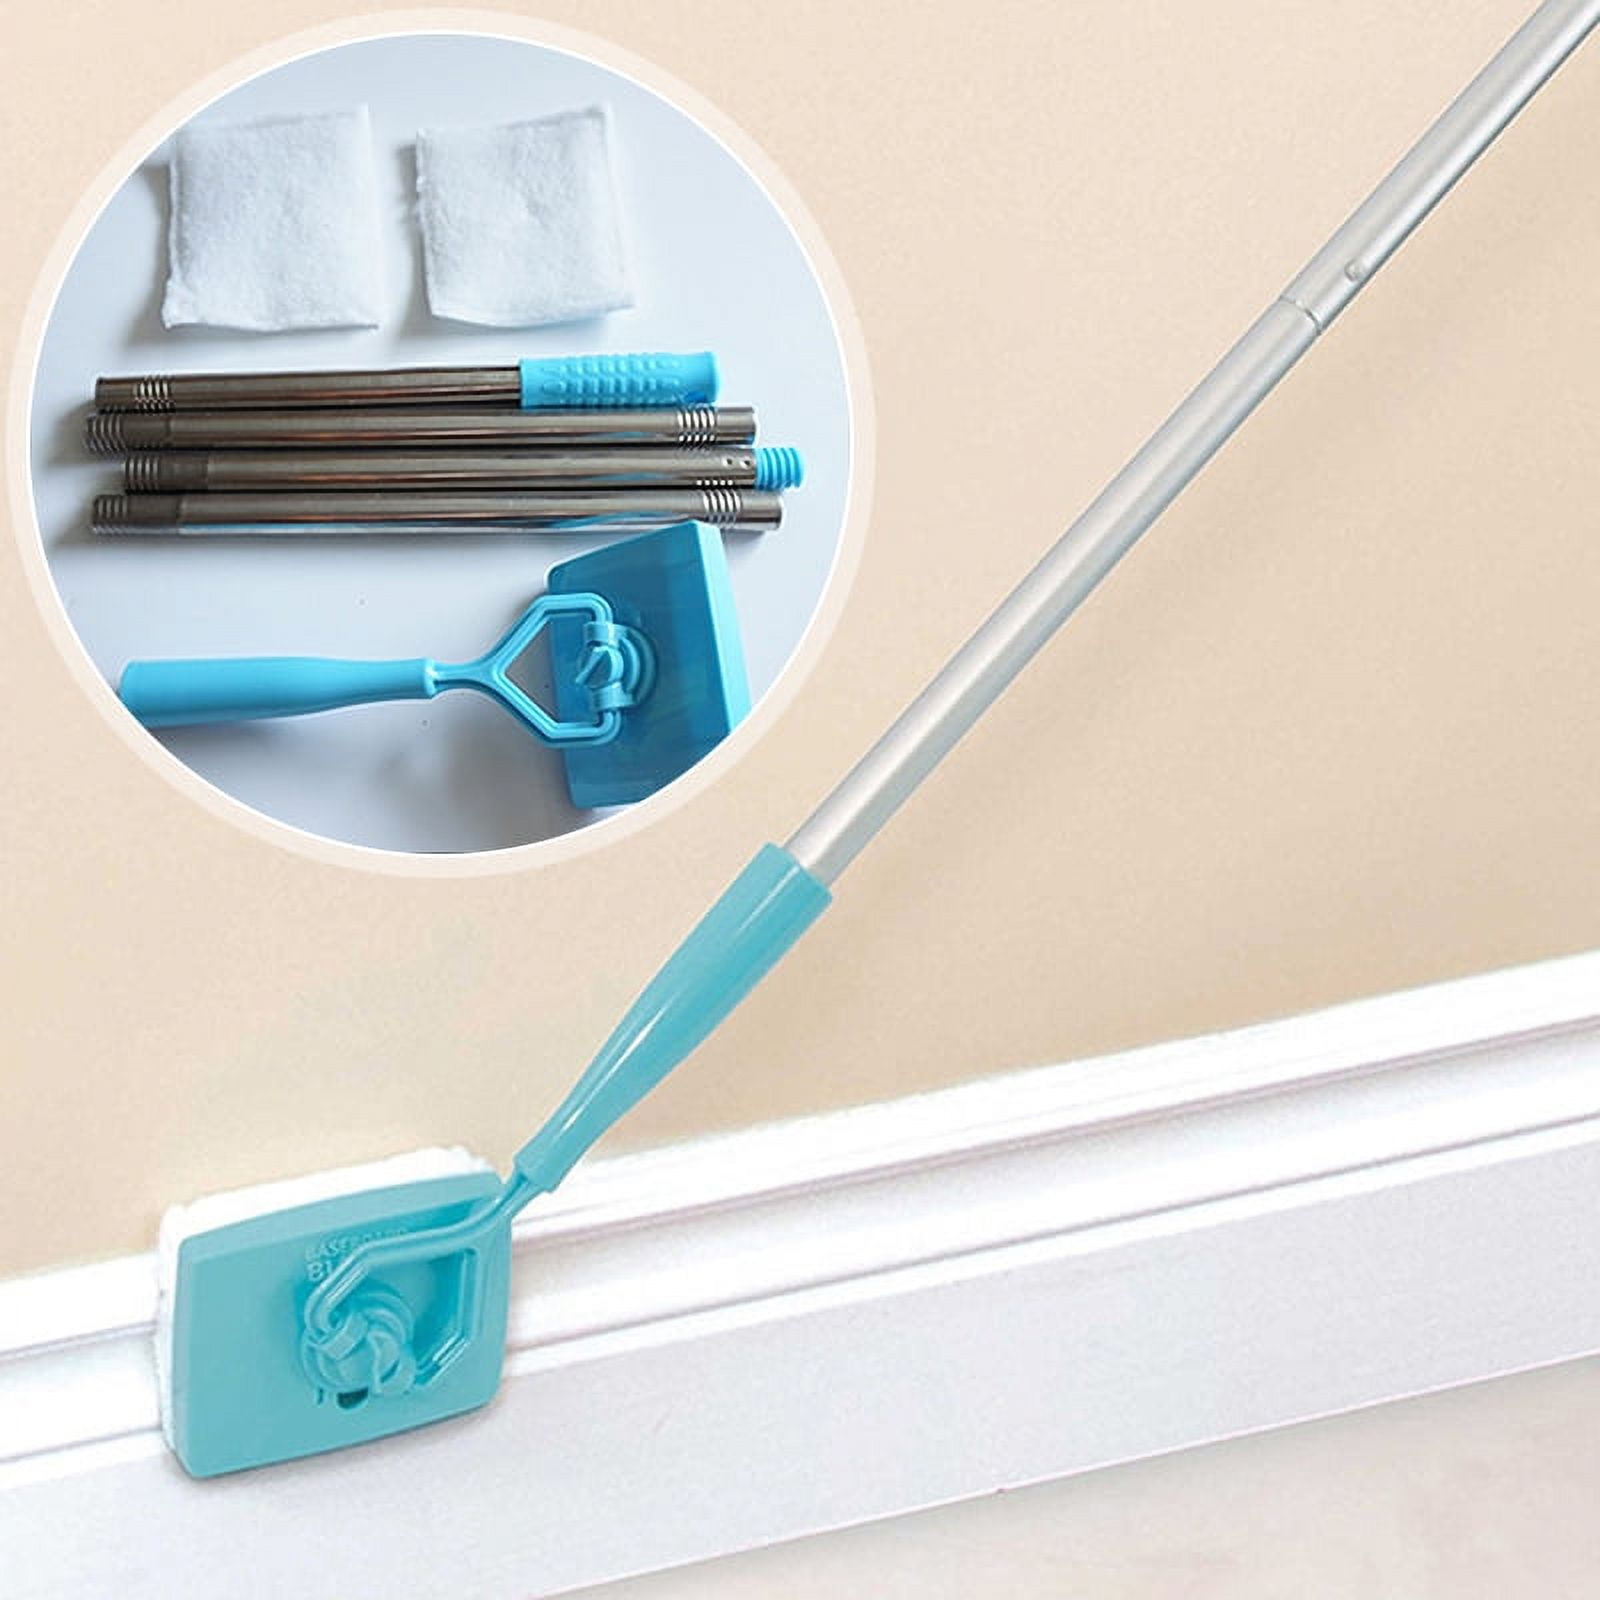  Baseboard Cleaner Tool with Handle 5 Reusable Cleaning Pads by  No-Bending Mop Baseboard Cleaner Tool Long Handle Adjustable Baseboard  Molding Tool for Bathroom Microfiber Cleaning : Health & Household